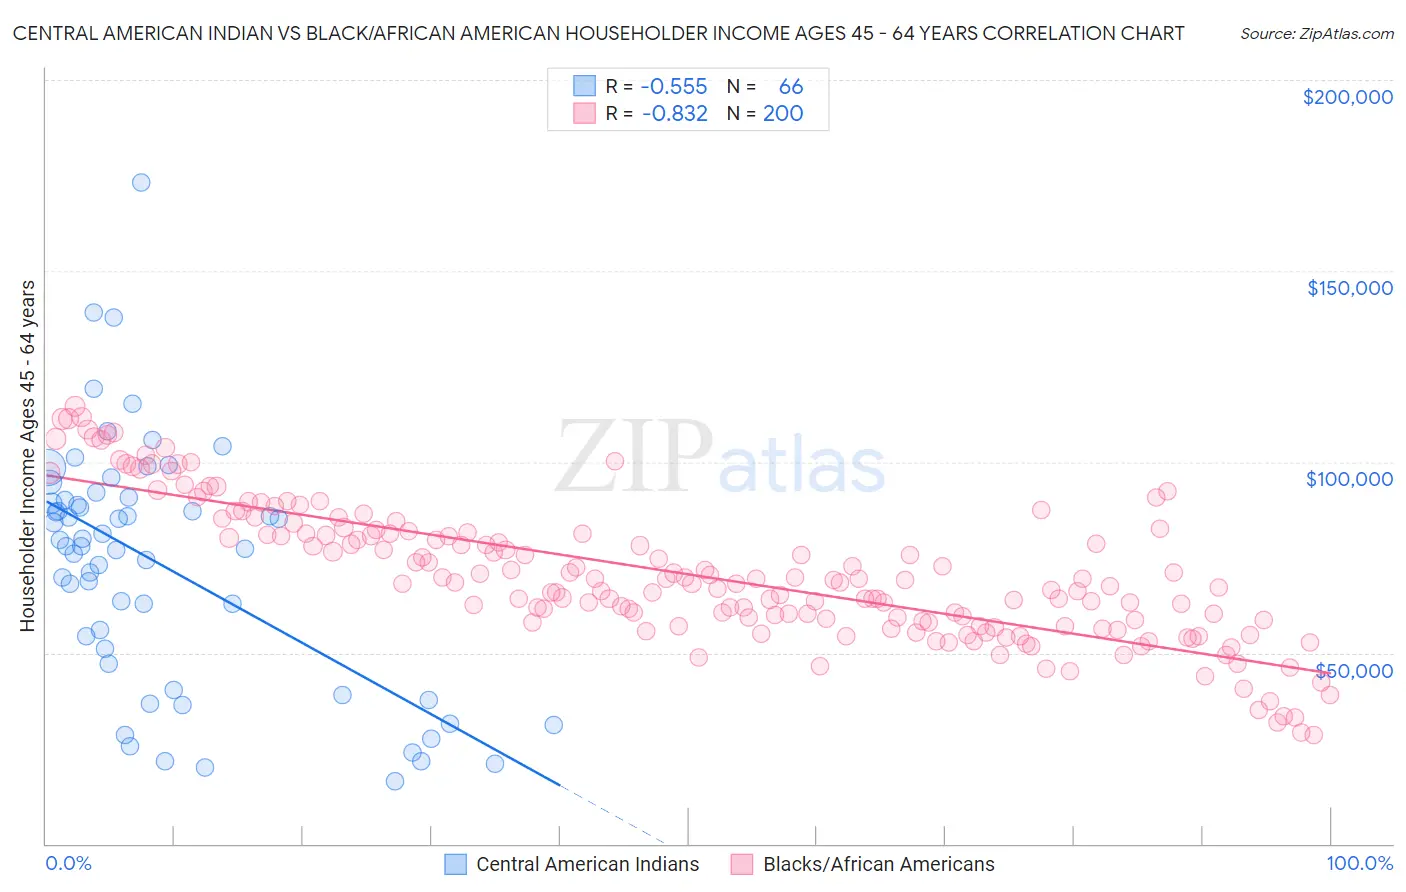 Central American Indian vs Black/African American Householder Income Ages 45 - 64 years